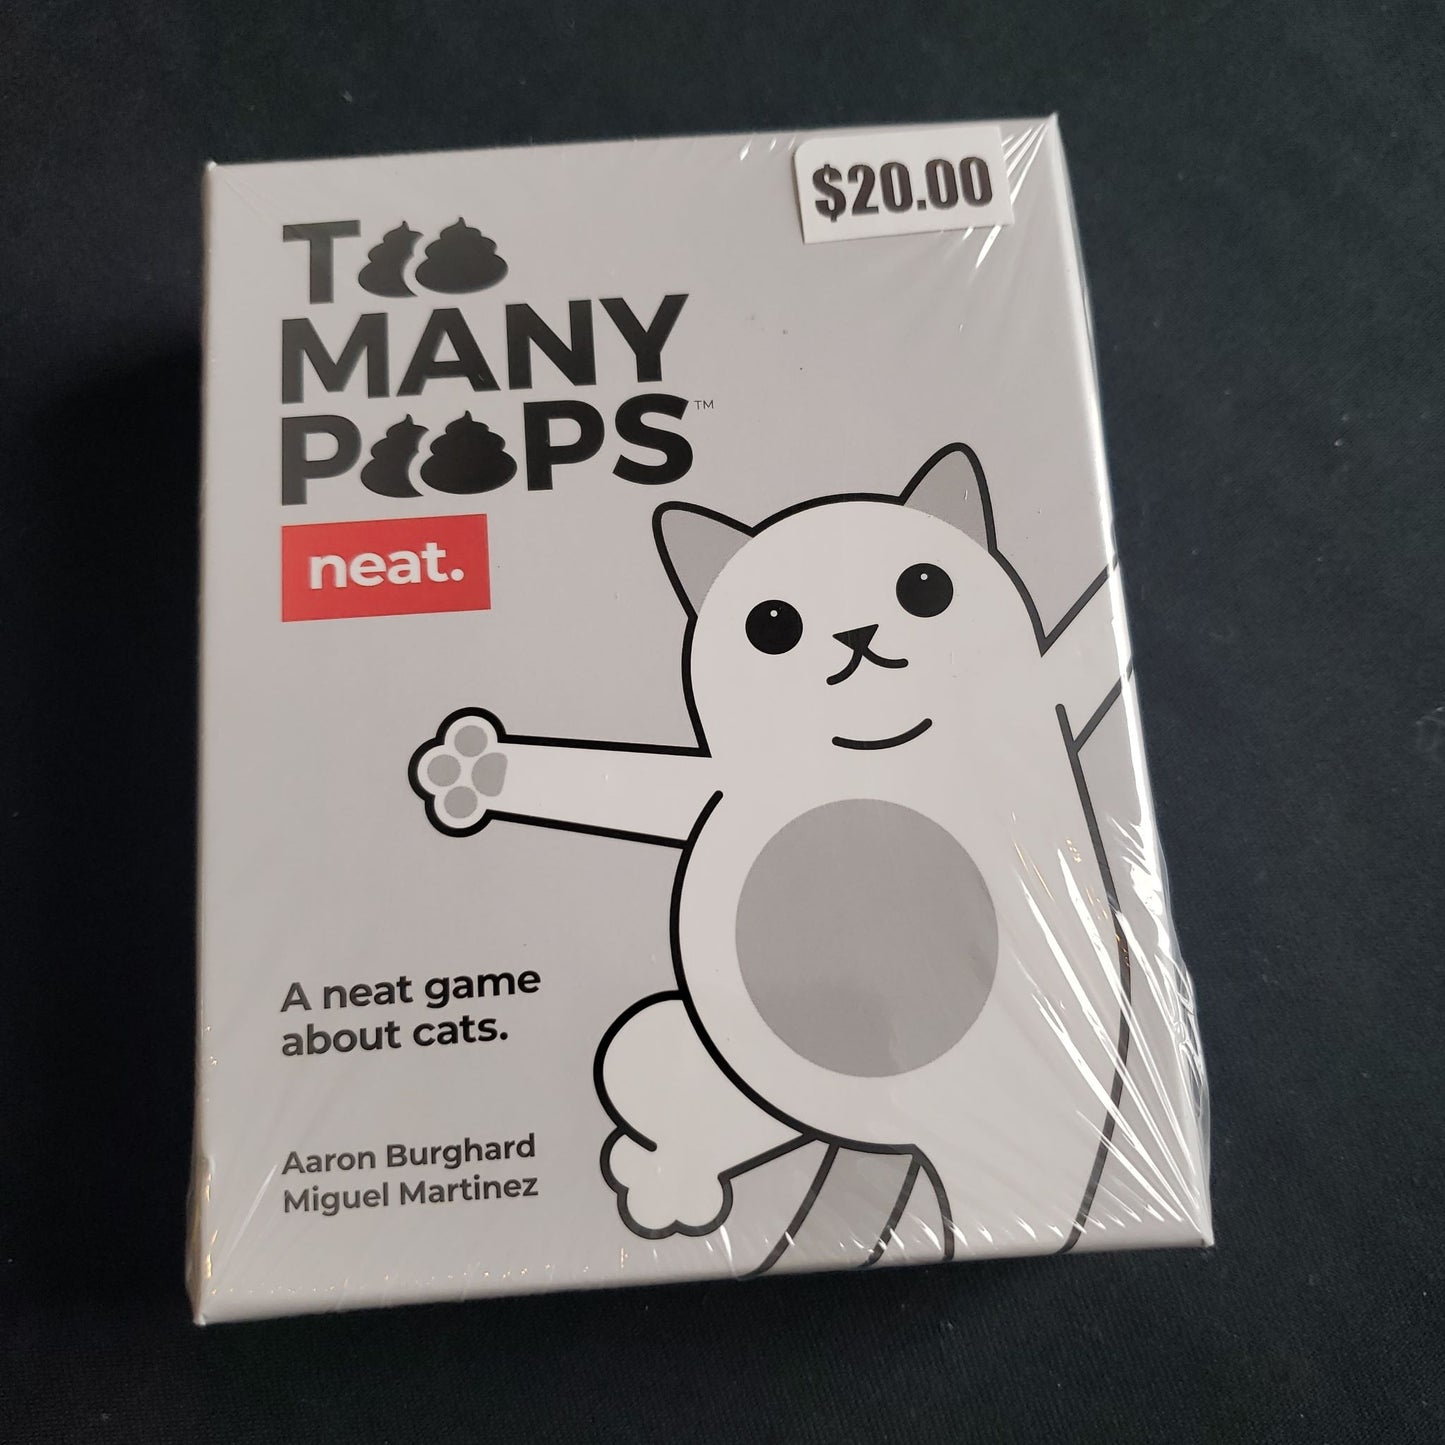 Image shows the front cover of the box of the Too Many Poops card game